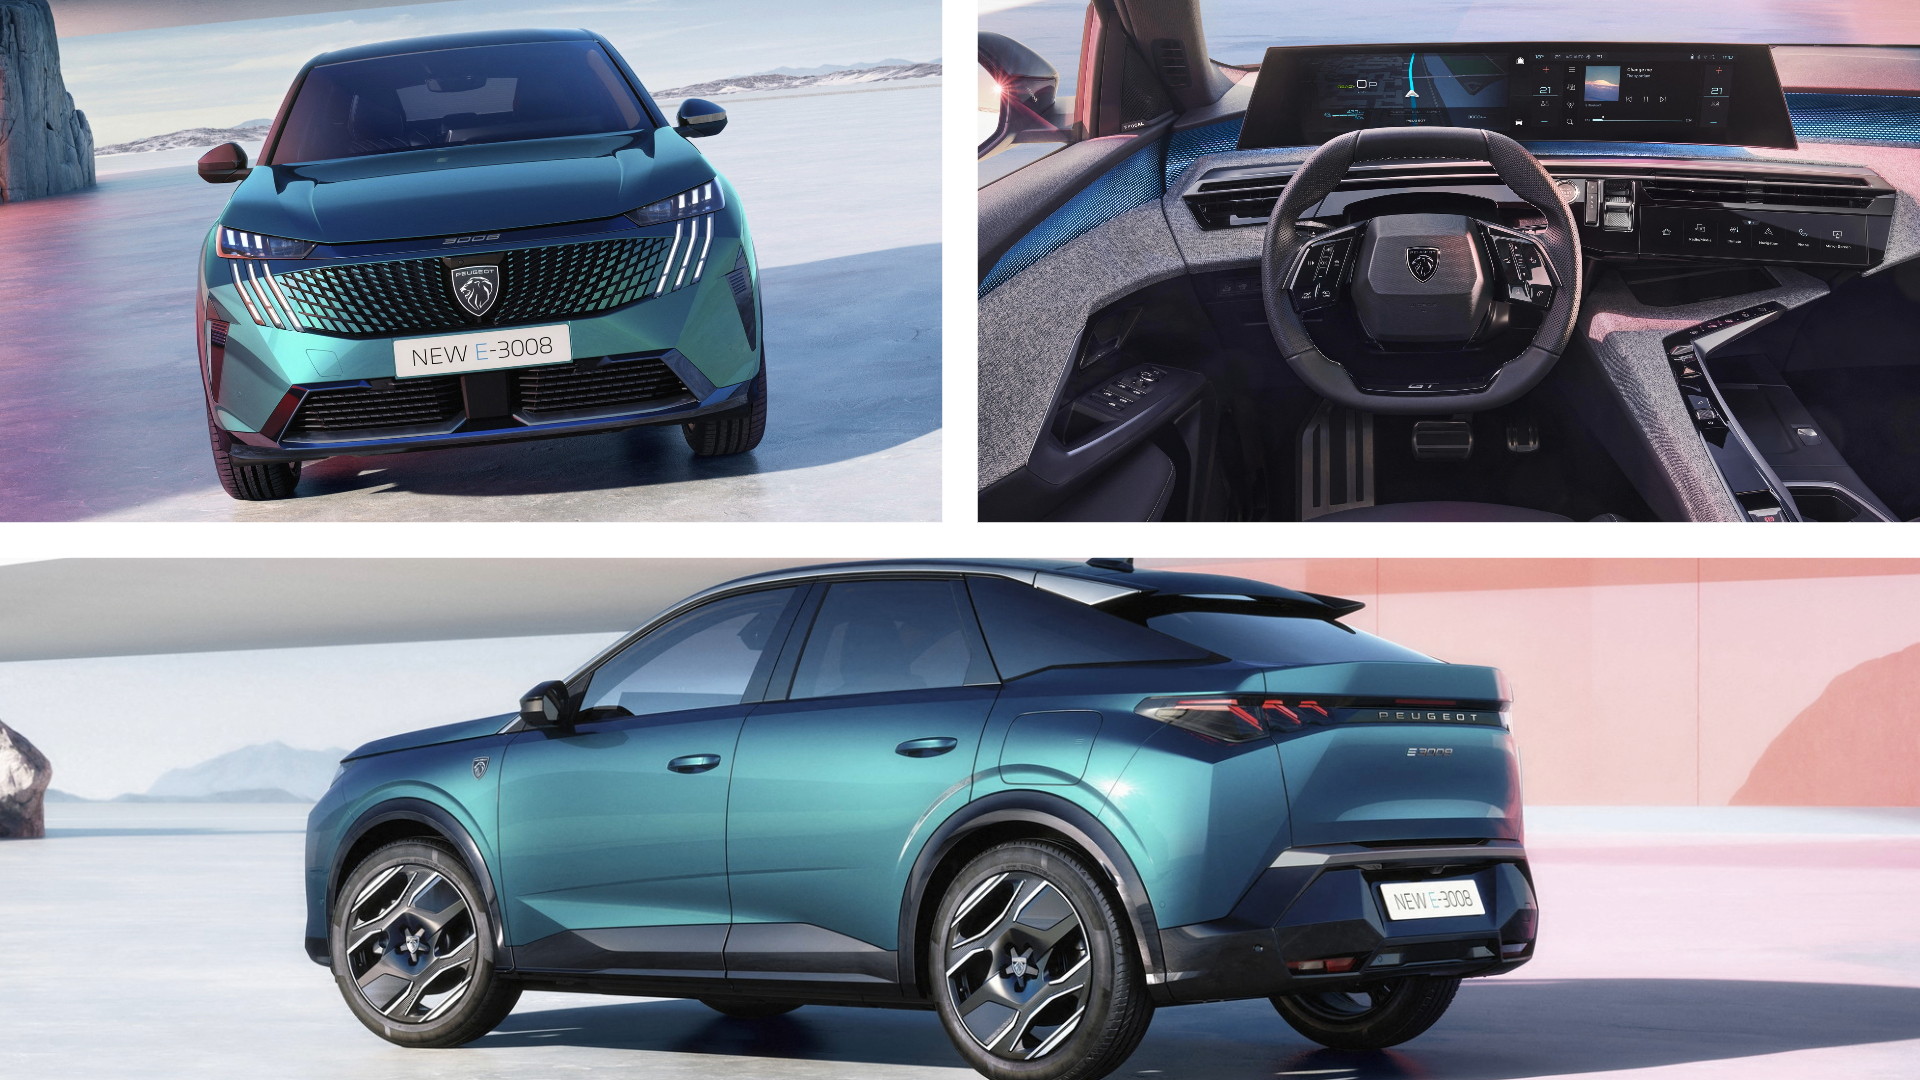 https://s1.cdn.autoevolution.com/images/news/all-new-peugeot-3008-crossover-coupe-launches-in-hybrid-and-electric-forms-224982_1.jpg